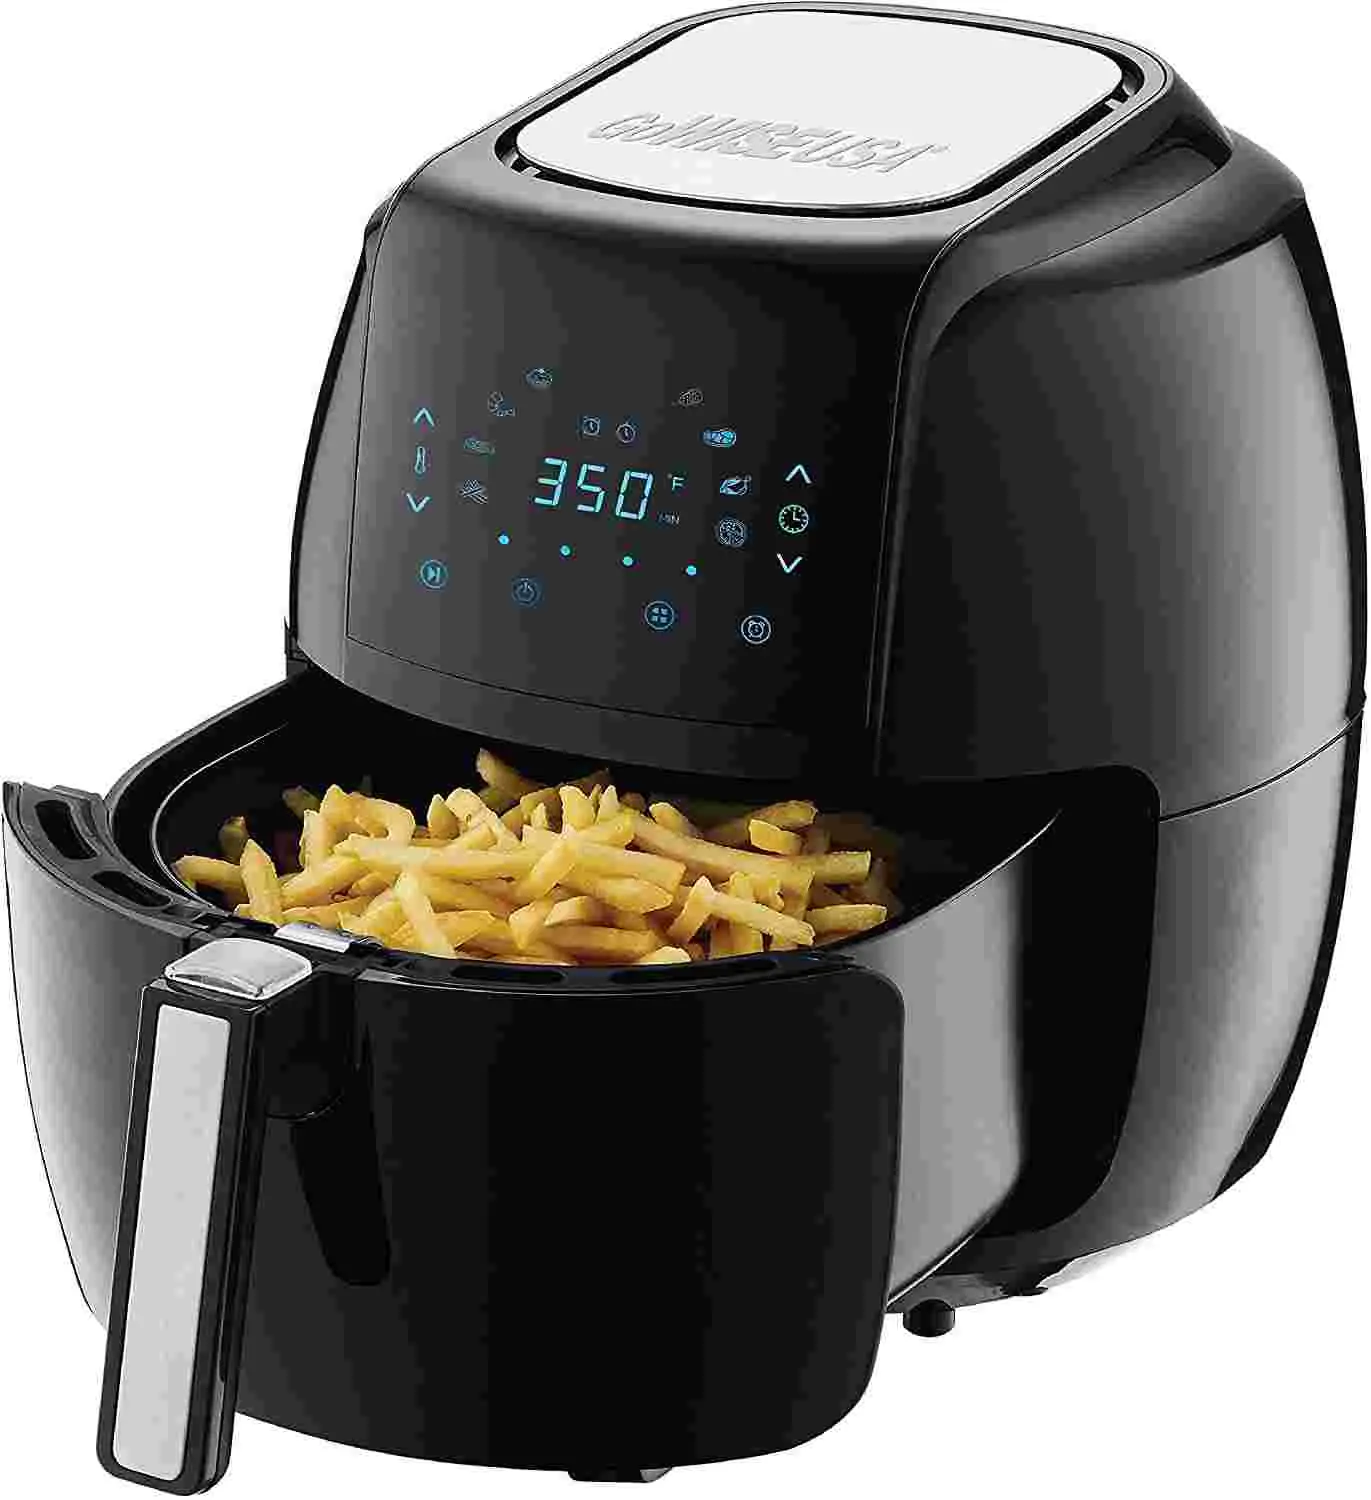 8 Best Air Fryer For Small Kitchen in USA 2021